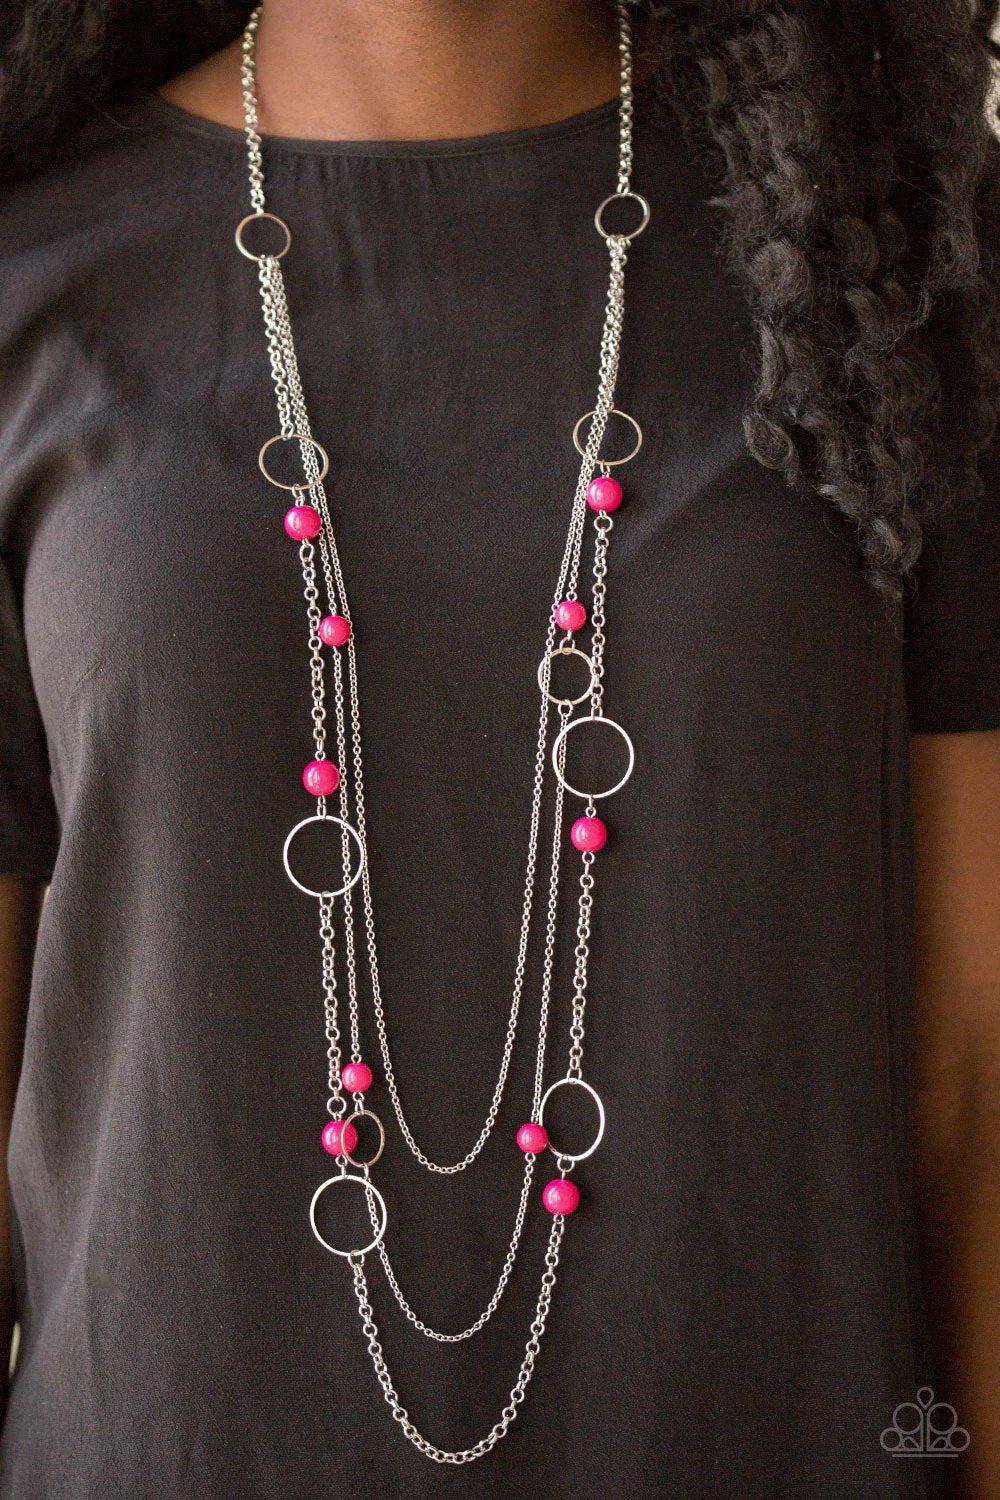 Beachside Babe Pink Necklace - Paparazzi Accessories- on model - CarasShop.com - $5 Jewelry by Cara Jewels